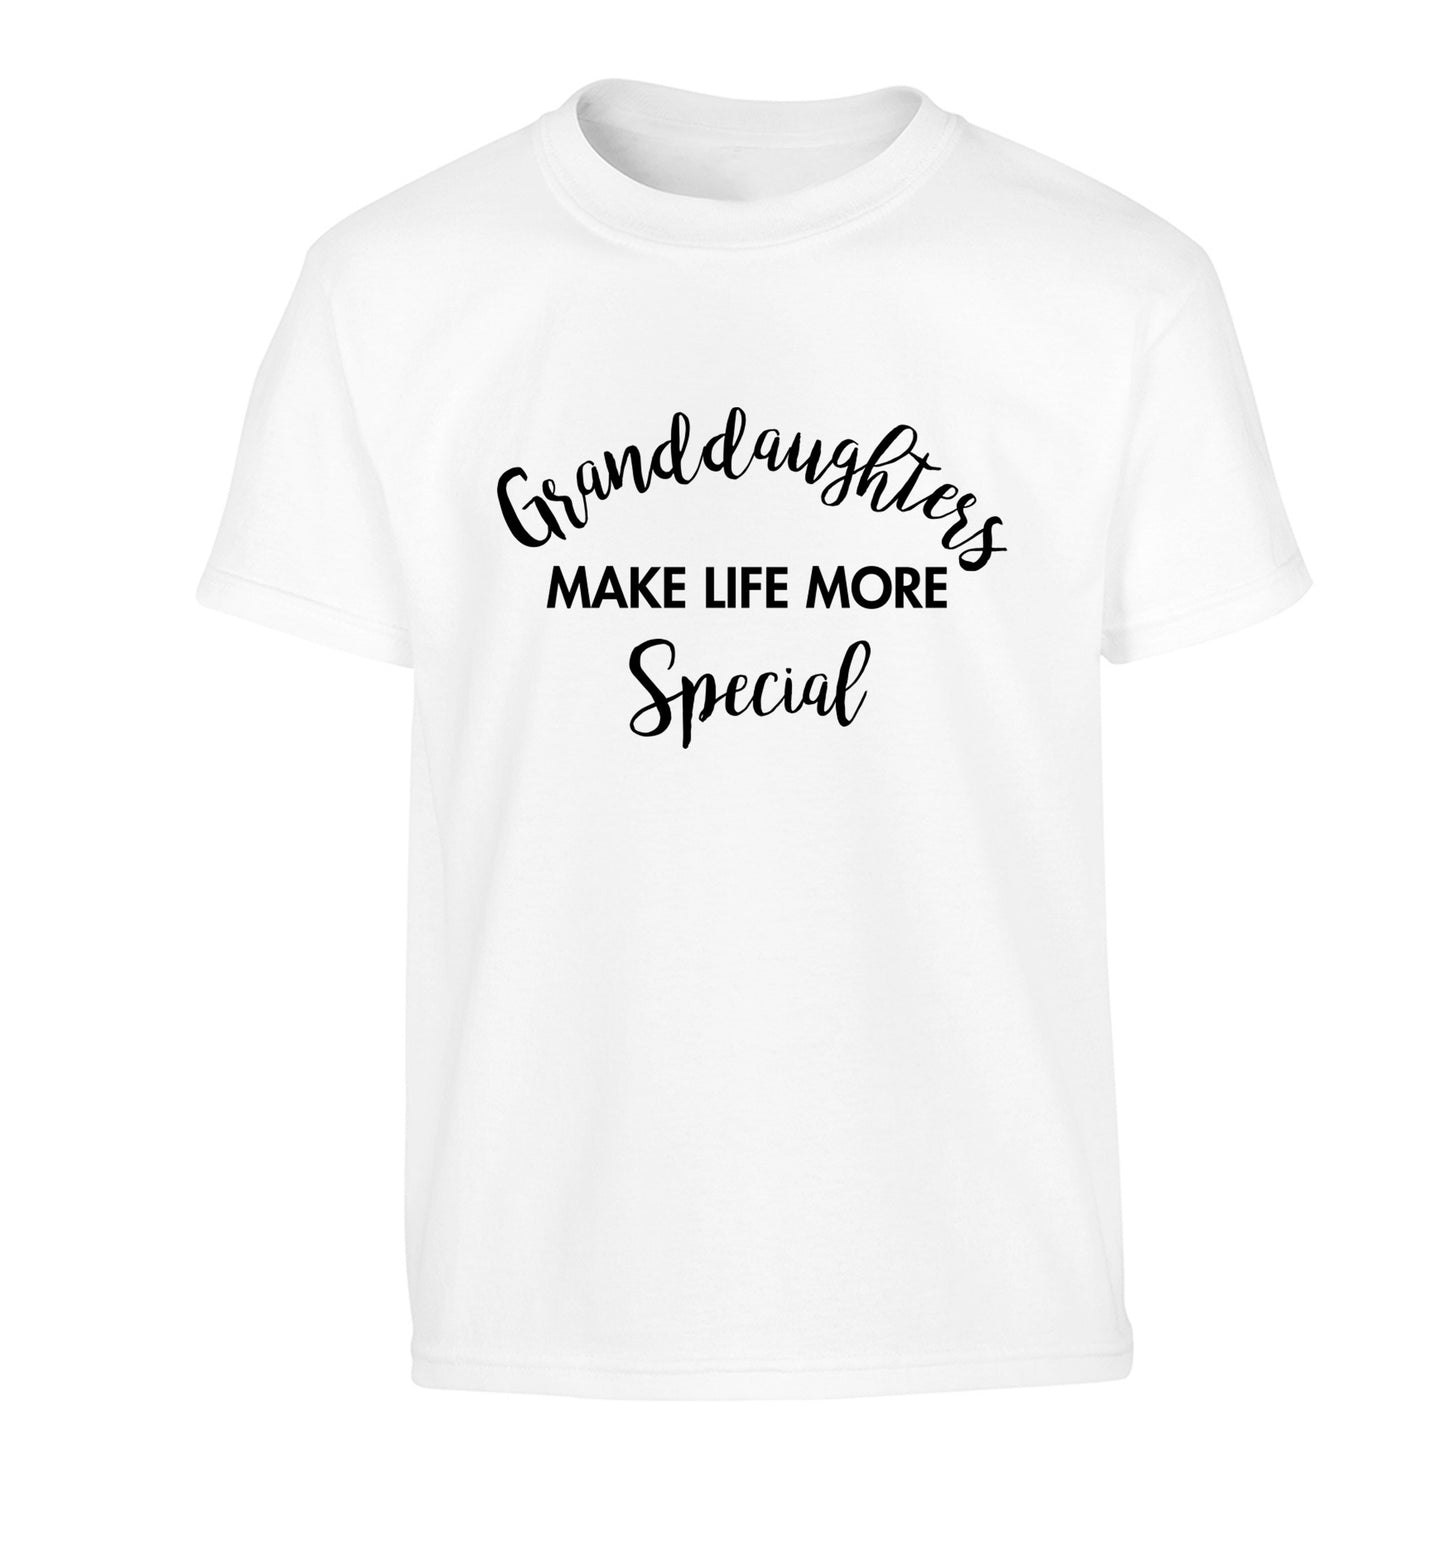 Granddaughters make life more special Children's white Tshirt 12-14 Years